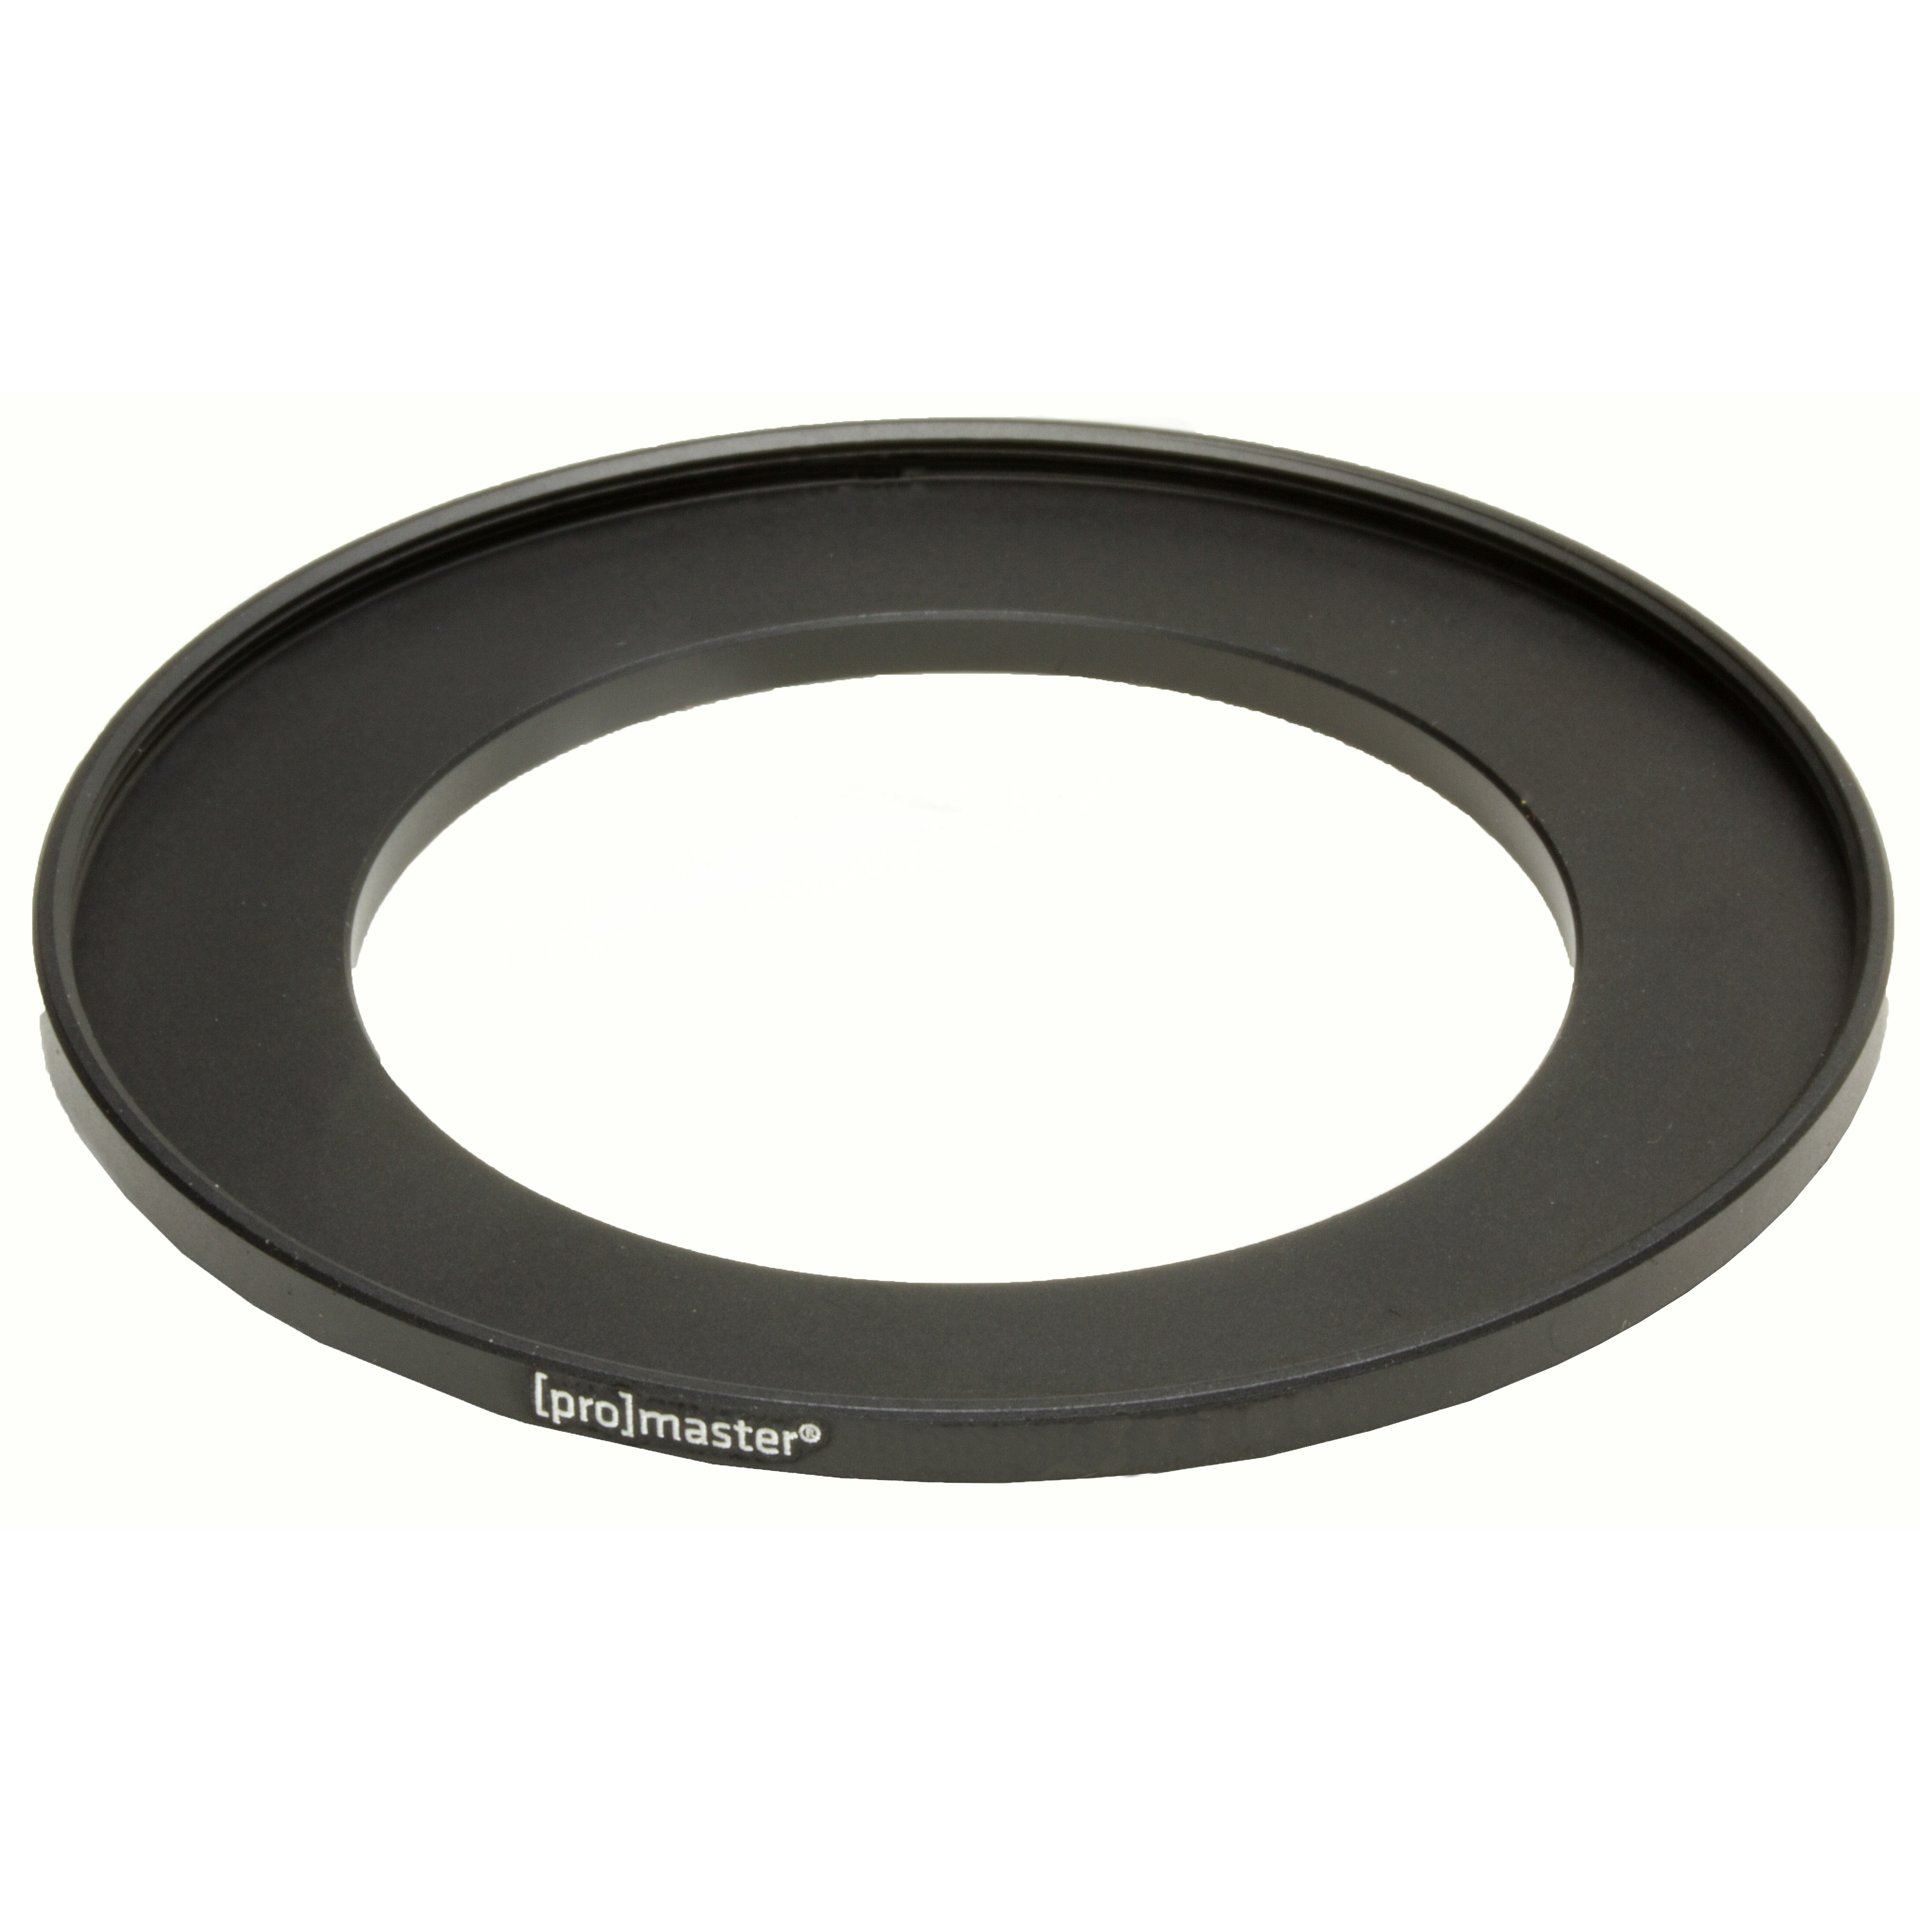 Promaster 4998  52-62mm Step-Up Ring